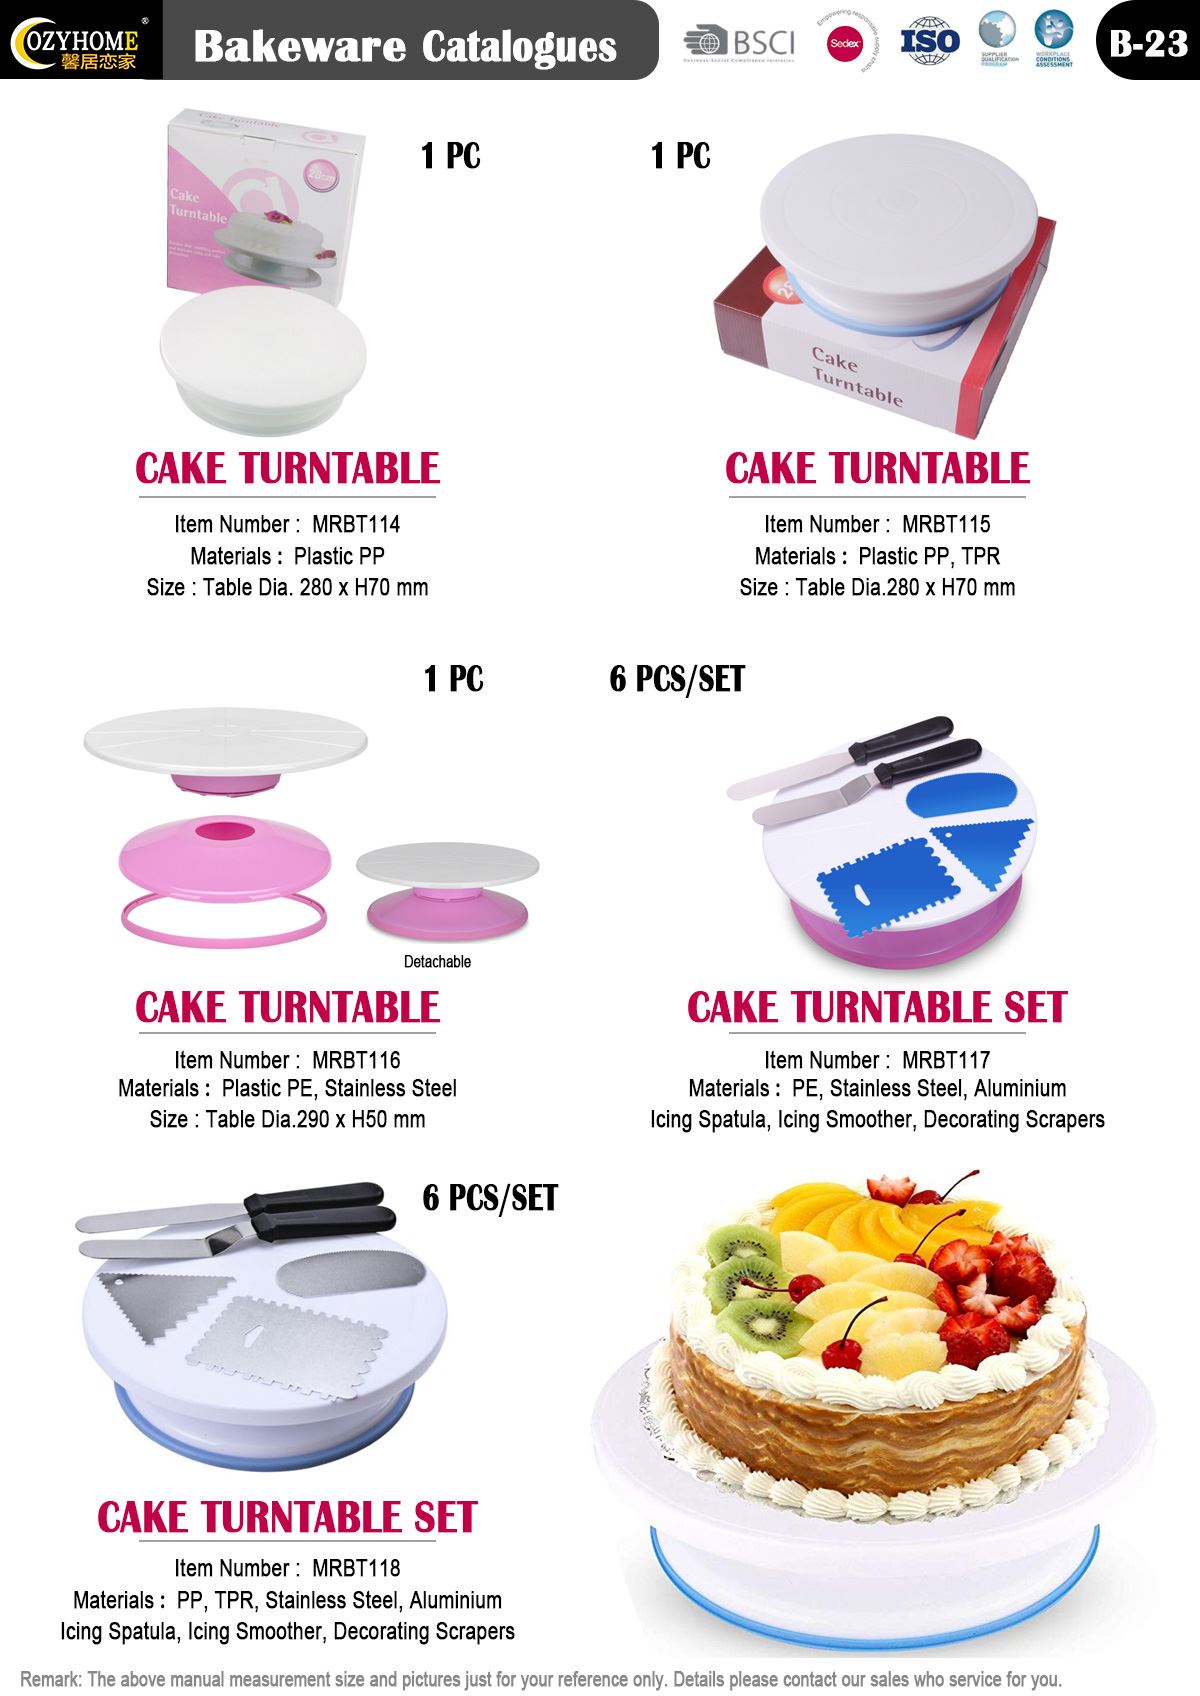 Bakeware Page: B23